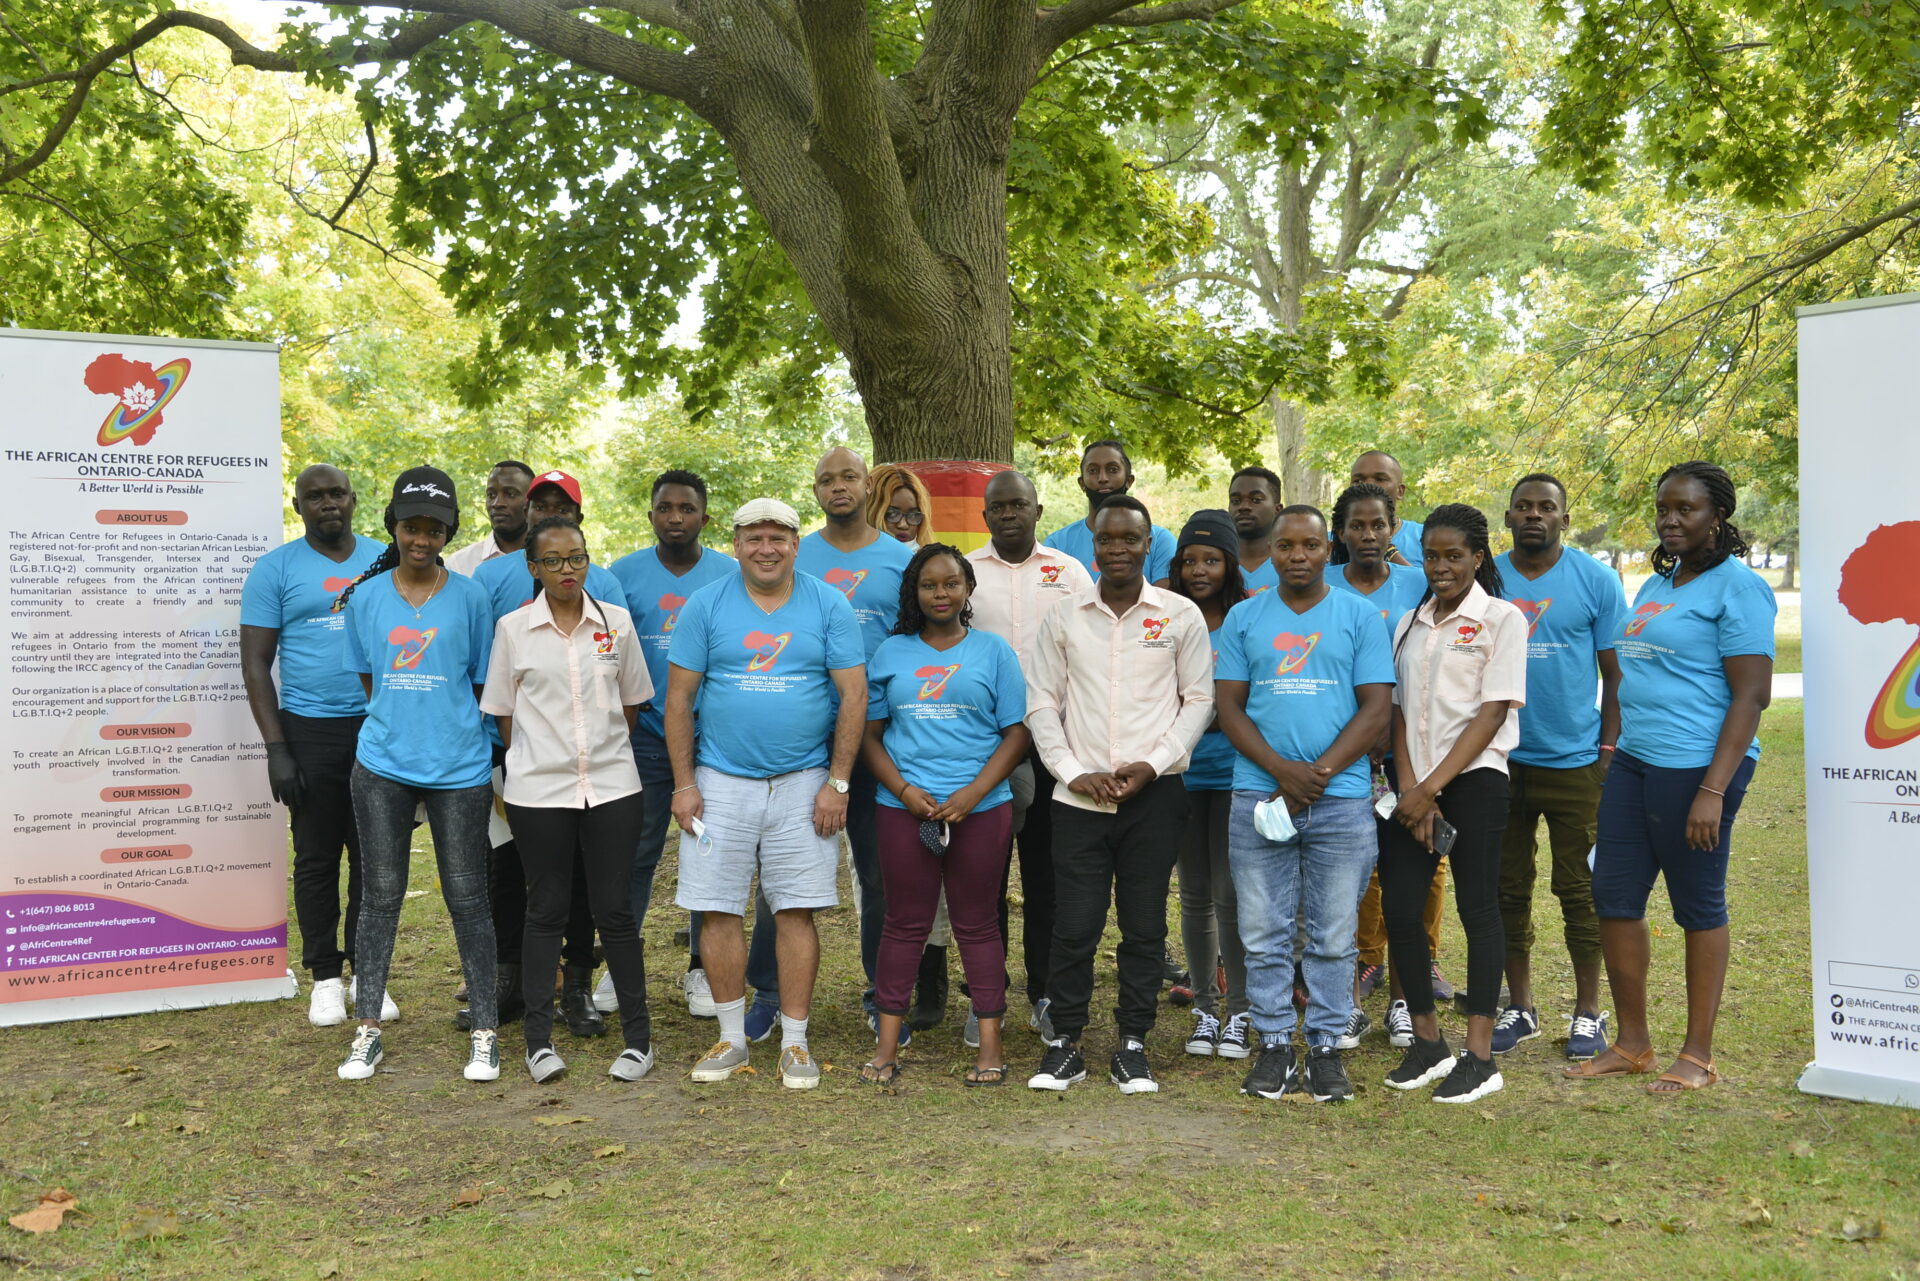 A group of volunteers and staff from the African Centre for Refugees standing together in a park